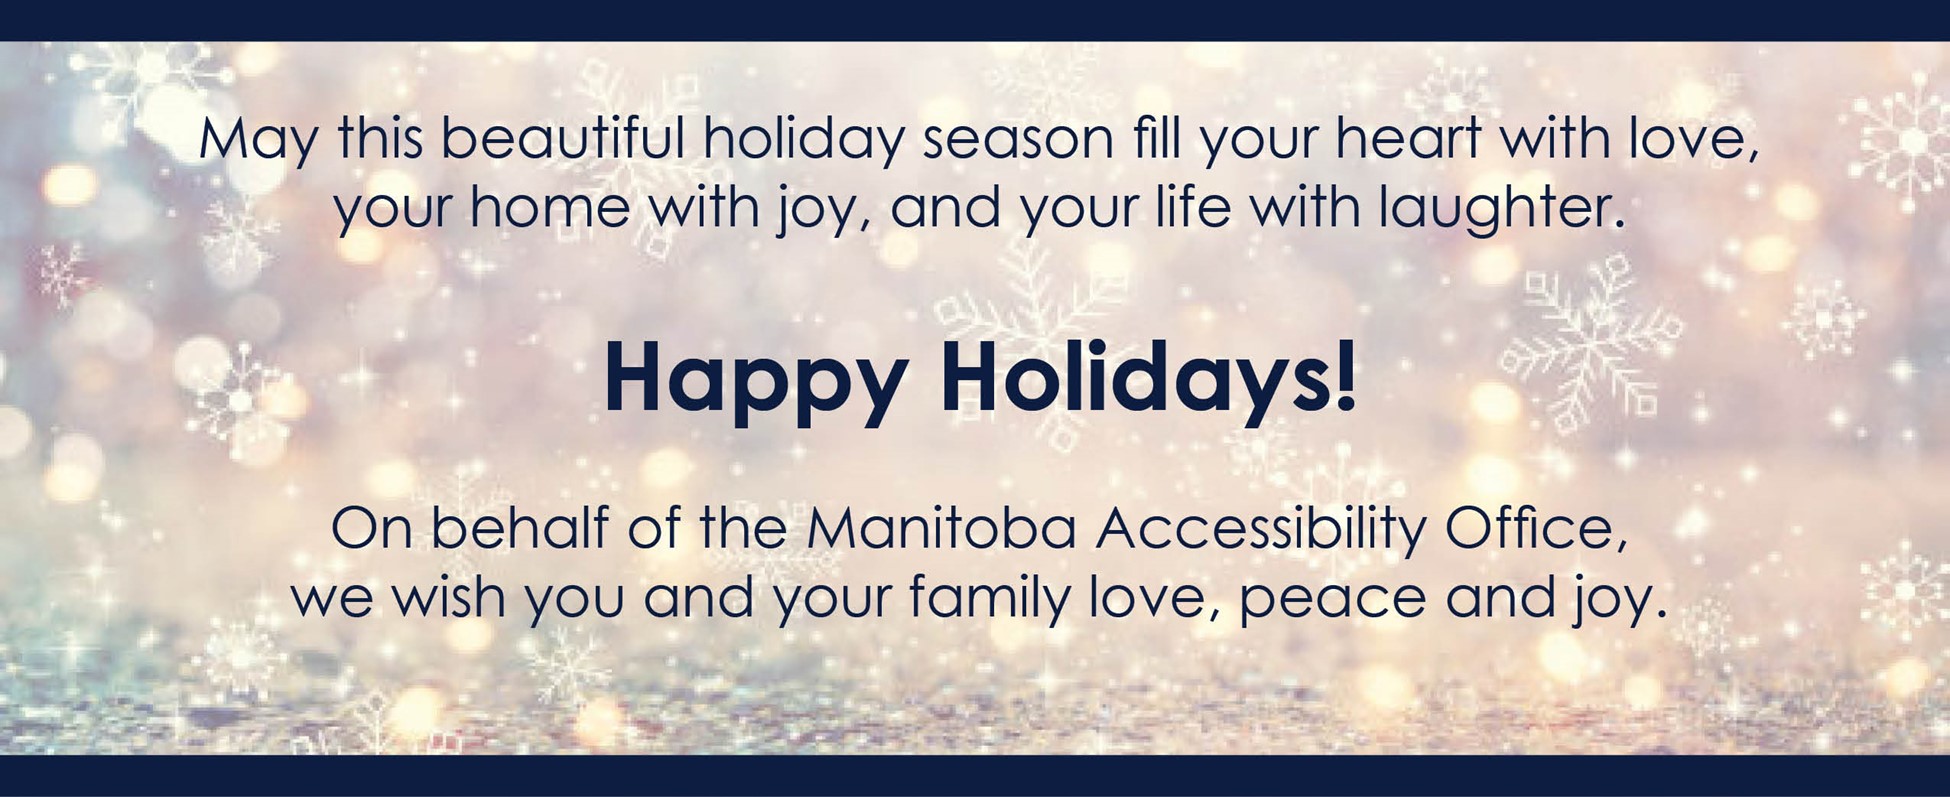 Happy Holiday message. May this beautiful holiday season fill your heart with love, your home with joy, and your life with laughter. Happy Holidays! On behalf of the Manitoba Accessibility Office, we wish you and your family love, peace and joy. 